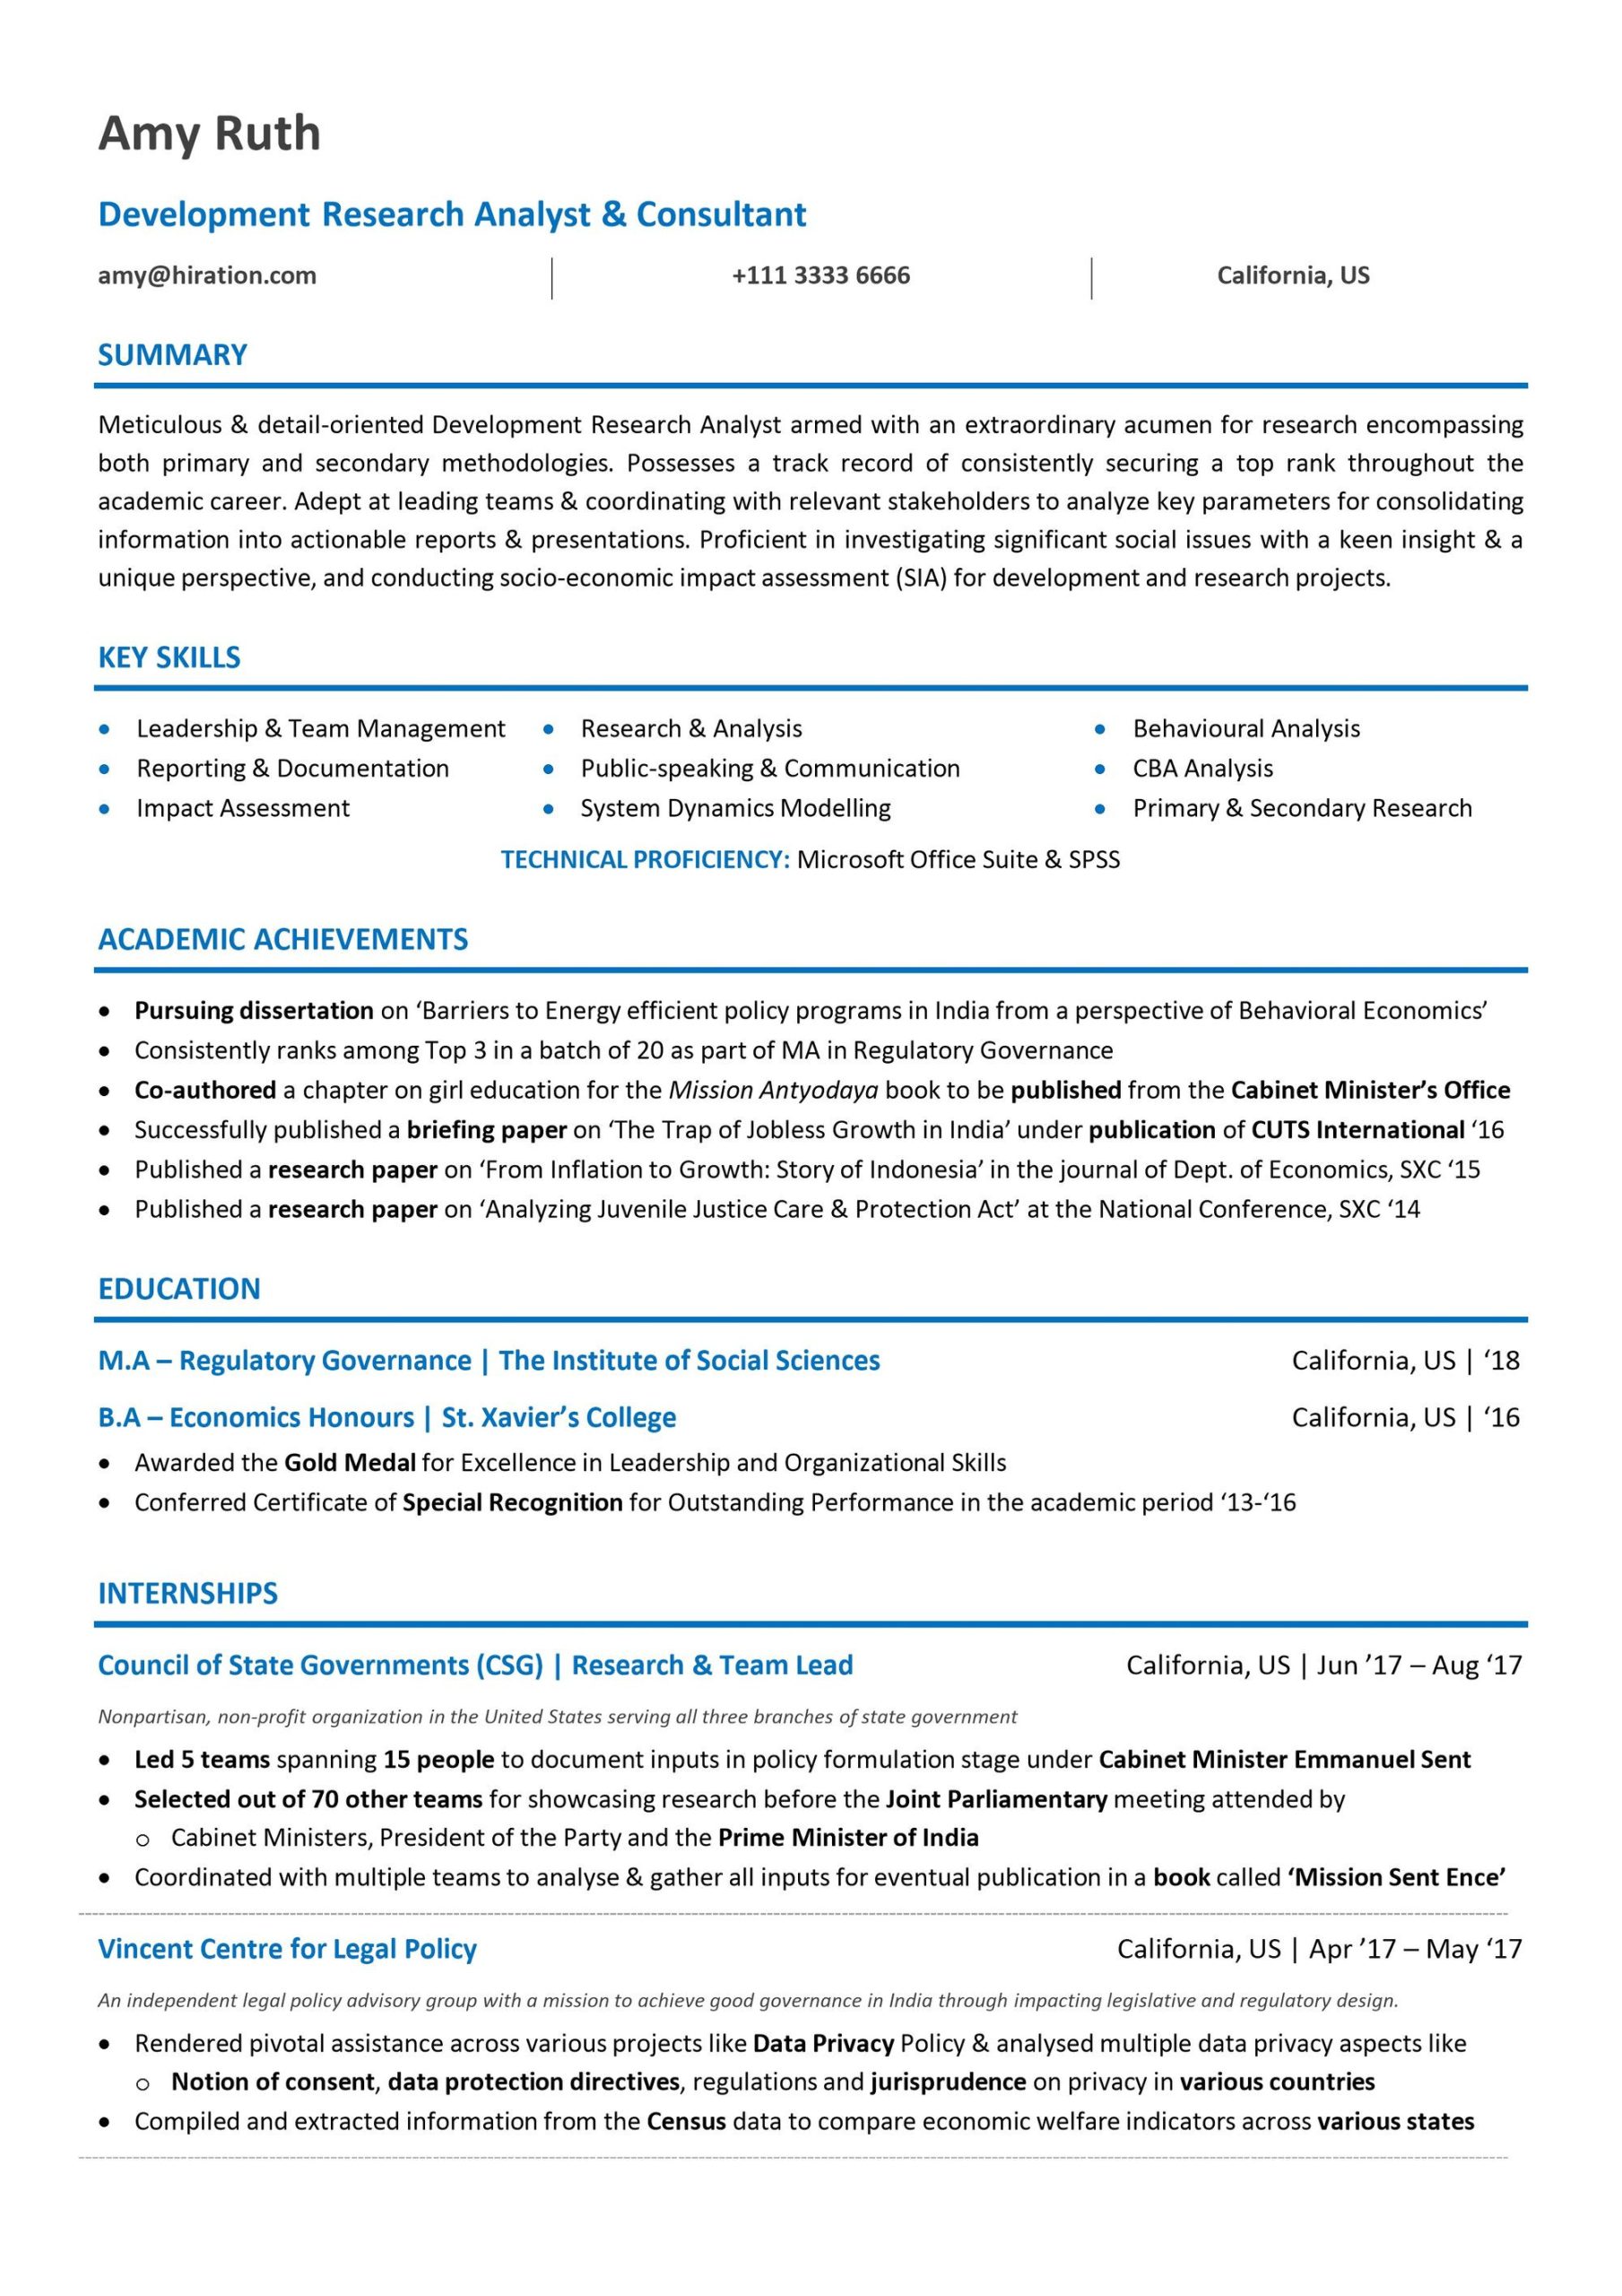 Sample Resume Objectives for Changing Careers Career Change Resume: 2022 Guide to Resume for Career Change